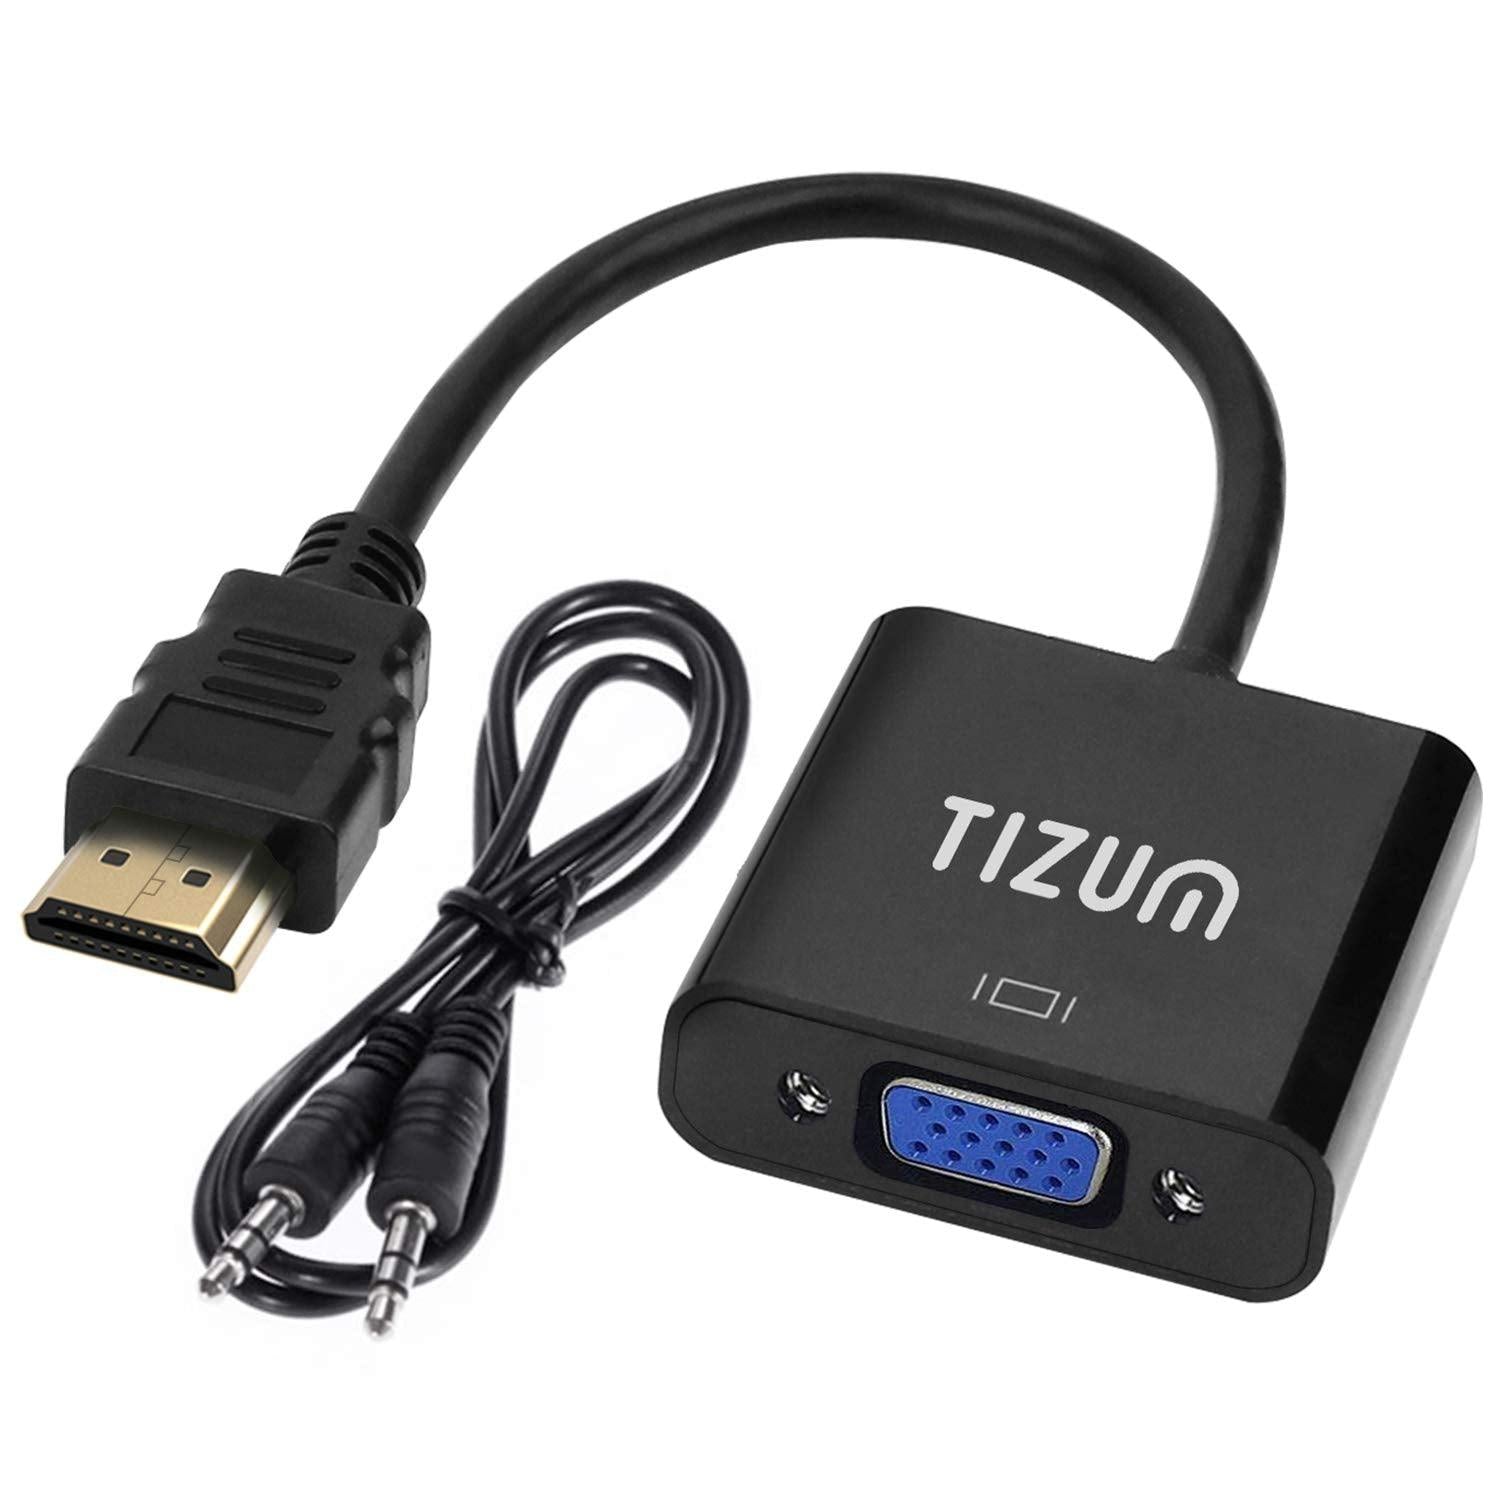 Tizum HDMI to VGA Adapter Cable 1080P for Projector, Computer, Laptop, TV, Projectors & TV - A - onBeli